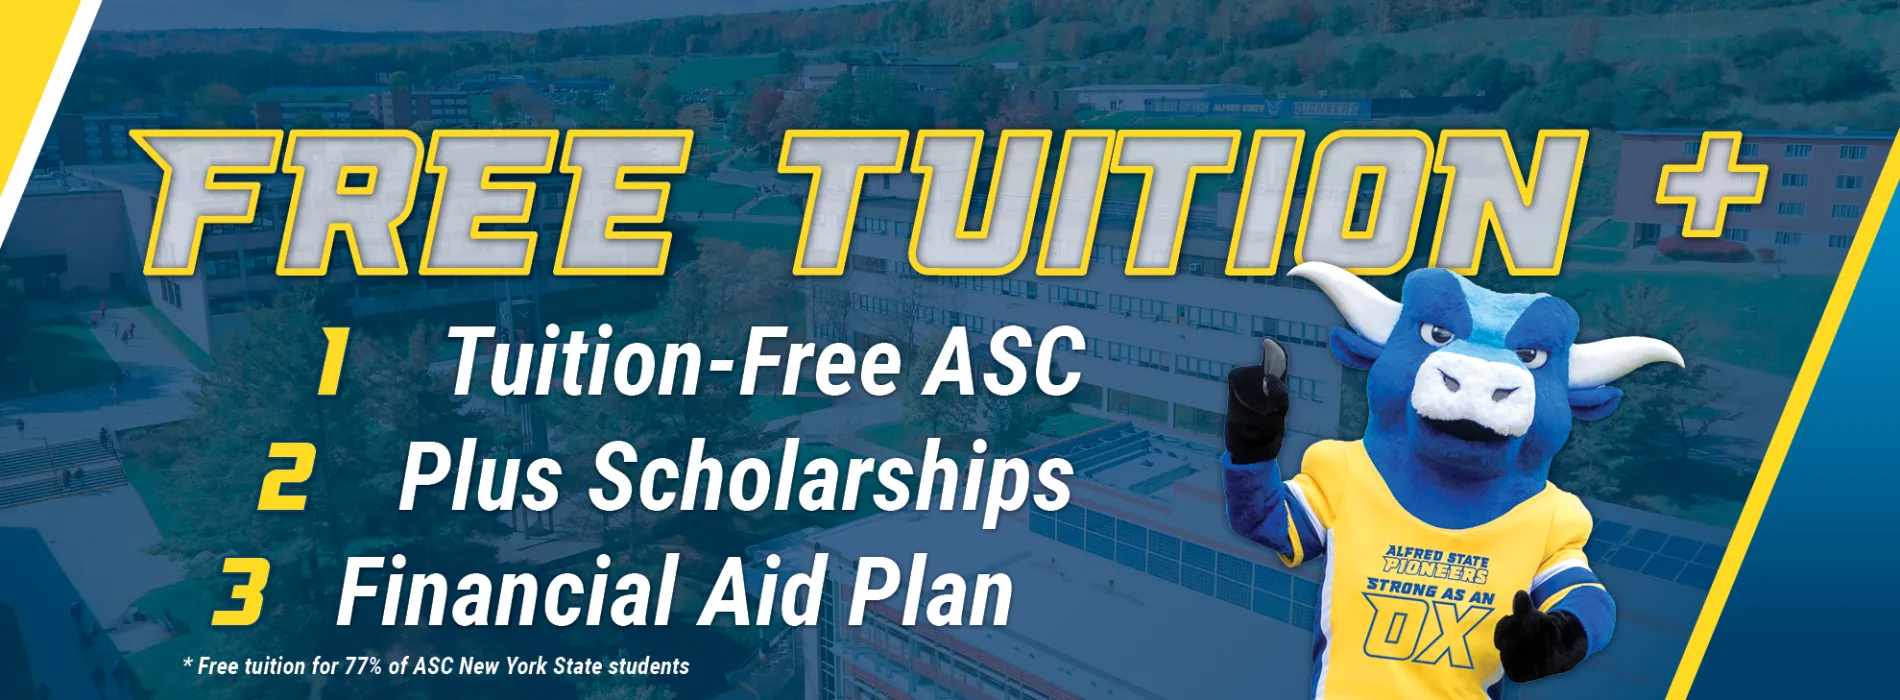 Free tuition +, 1) tuition-free ASC 2) plus scholarships 3) financial aid plan image of blue ox with hoof, * free tuition for 77% of ASC New York State students